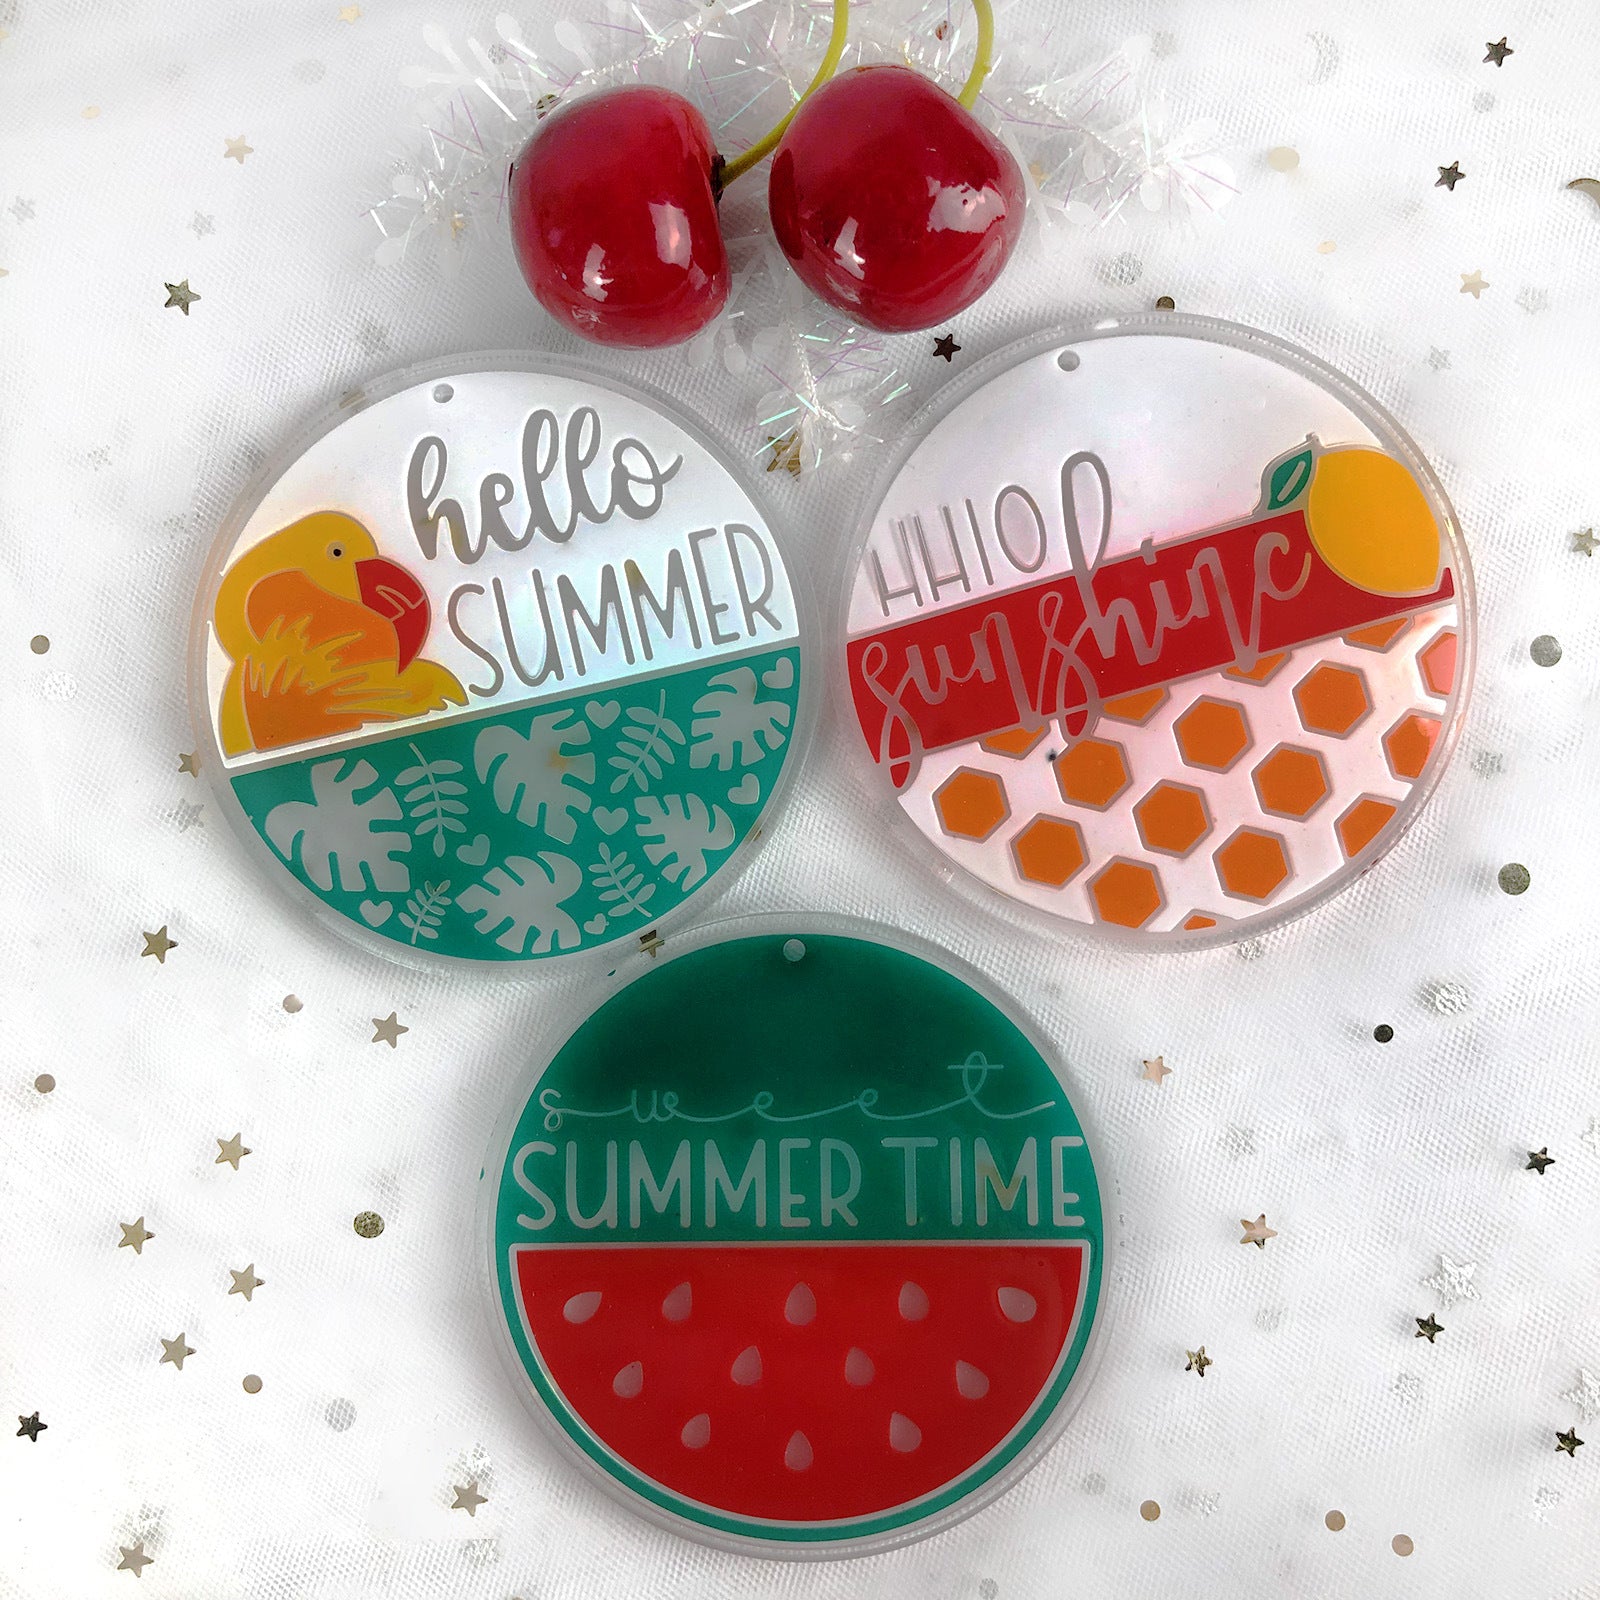 Hello Summer Round Backpack Charm Keychain Ornament Mold